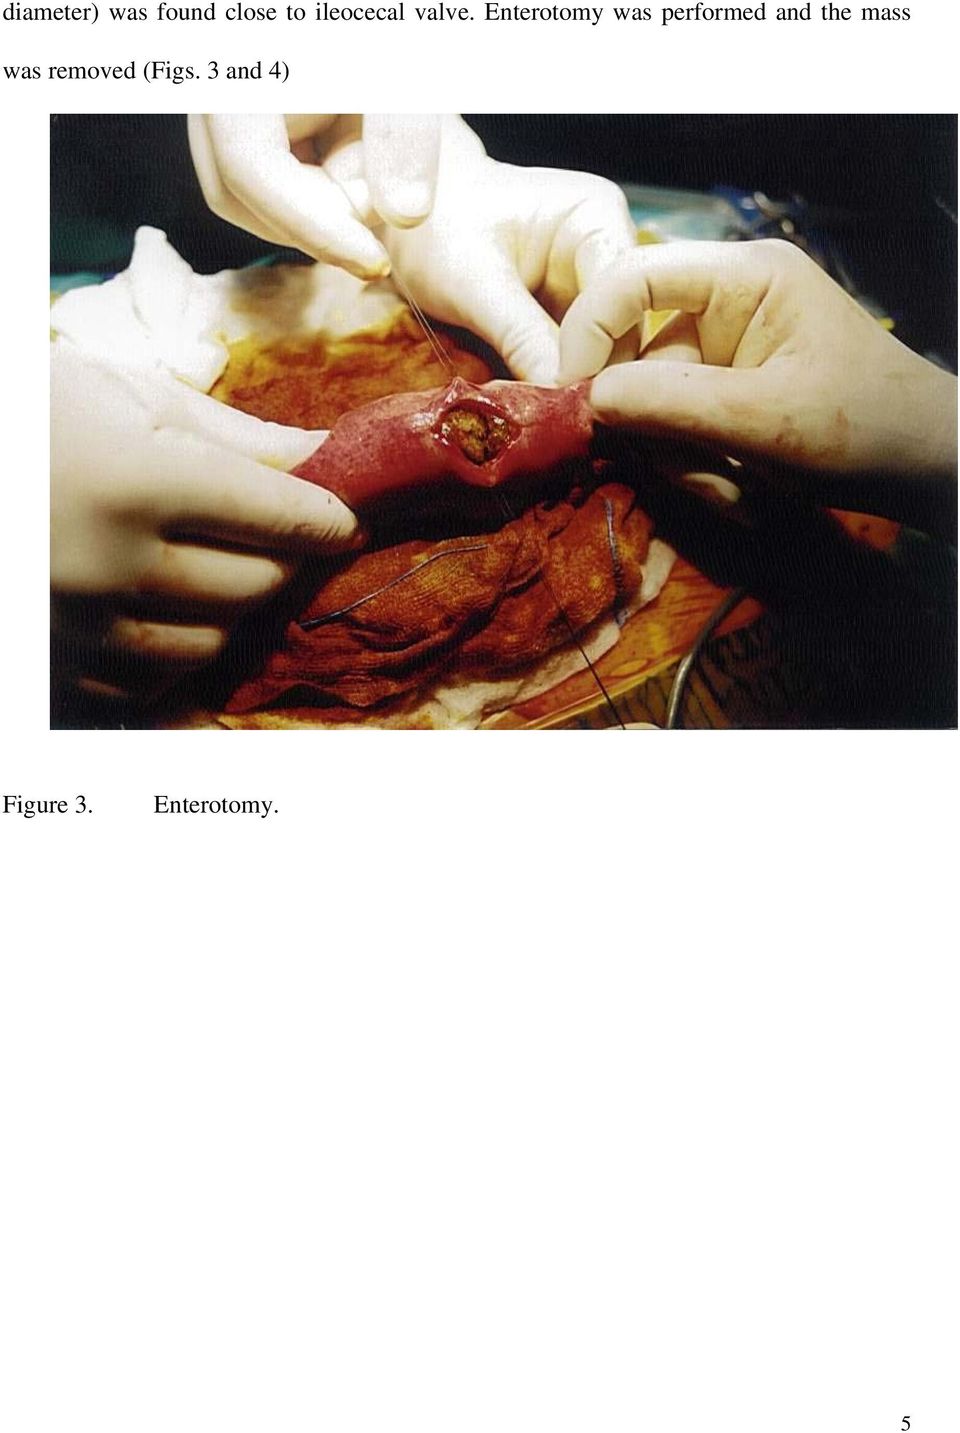 Enterotomy was performed and the